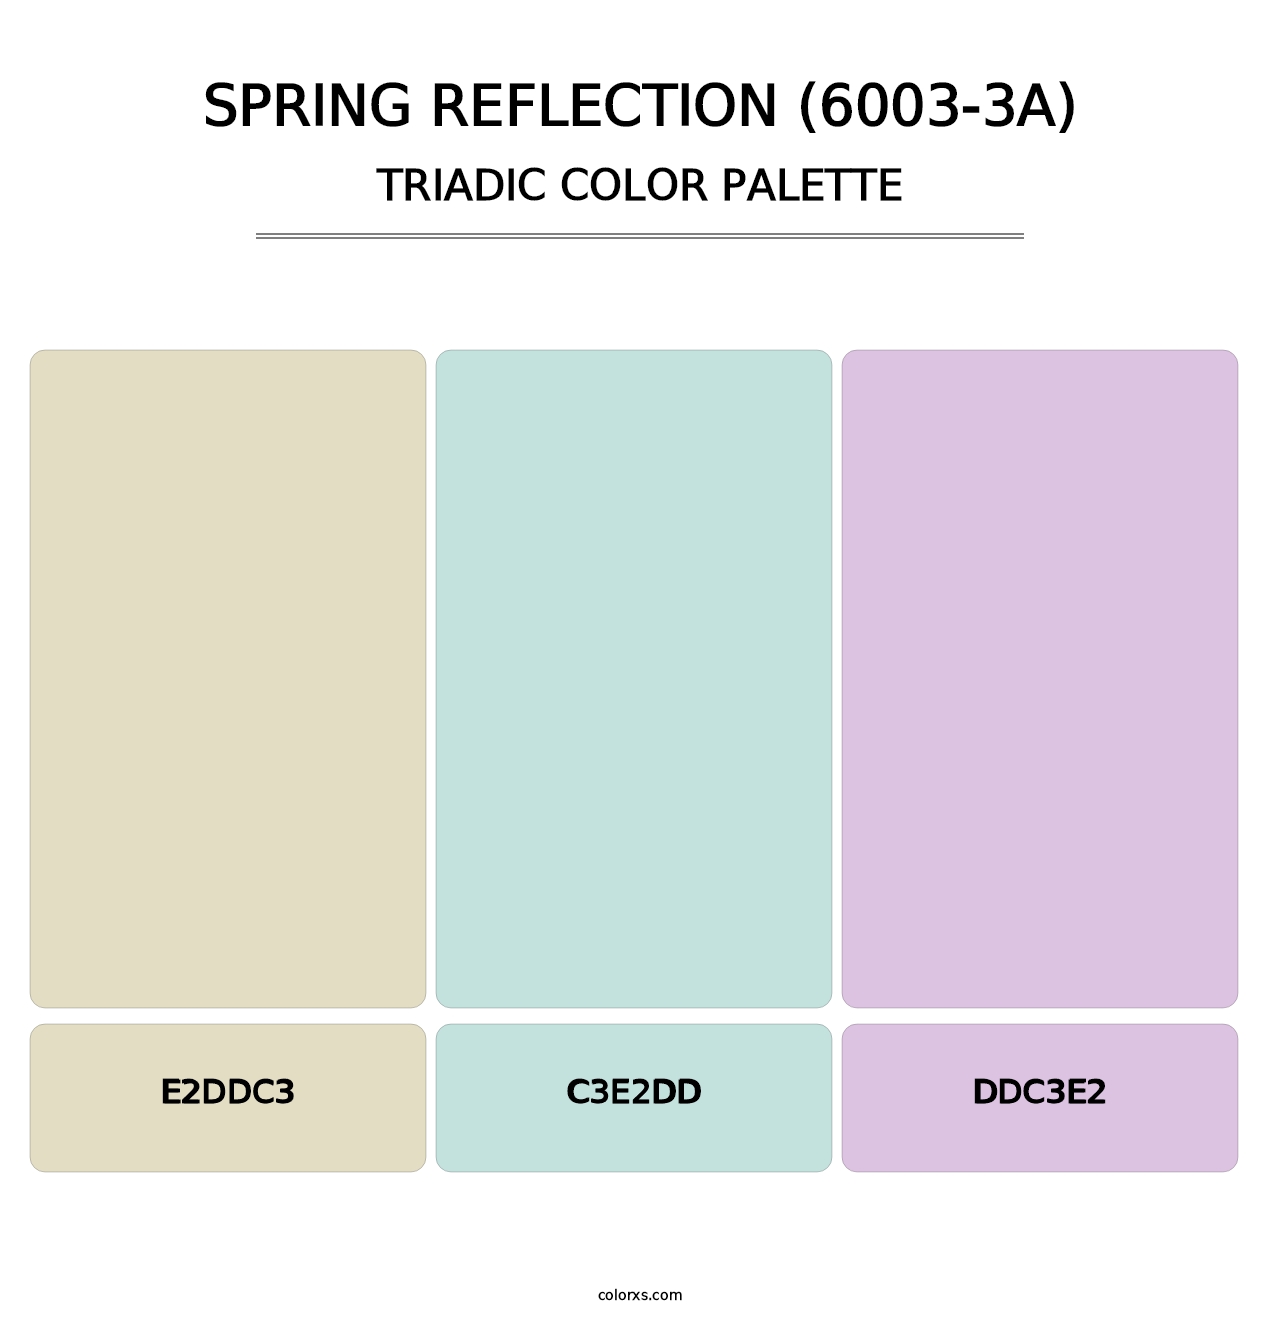 Spring Reflection (6003-3A) - Triadic Color Palette